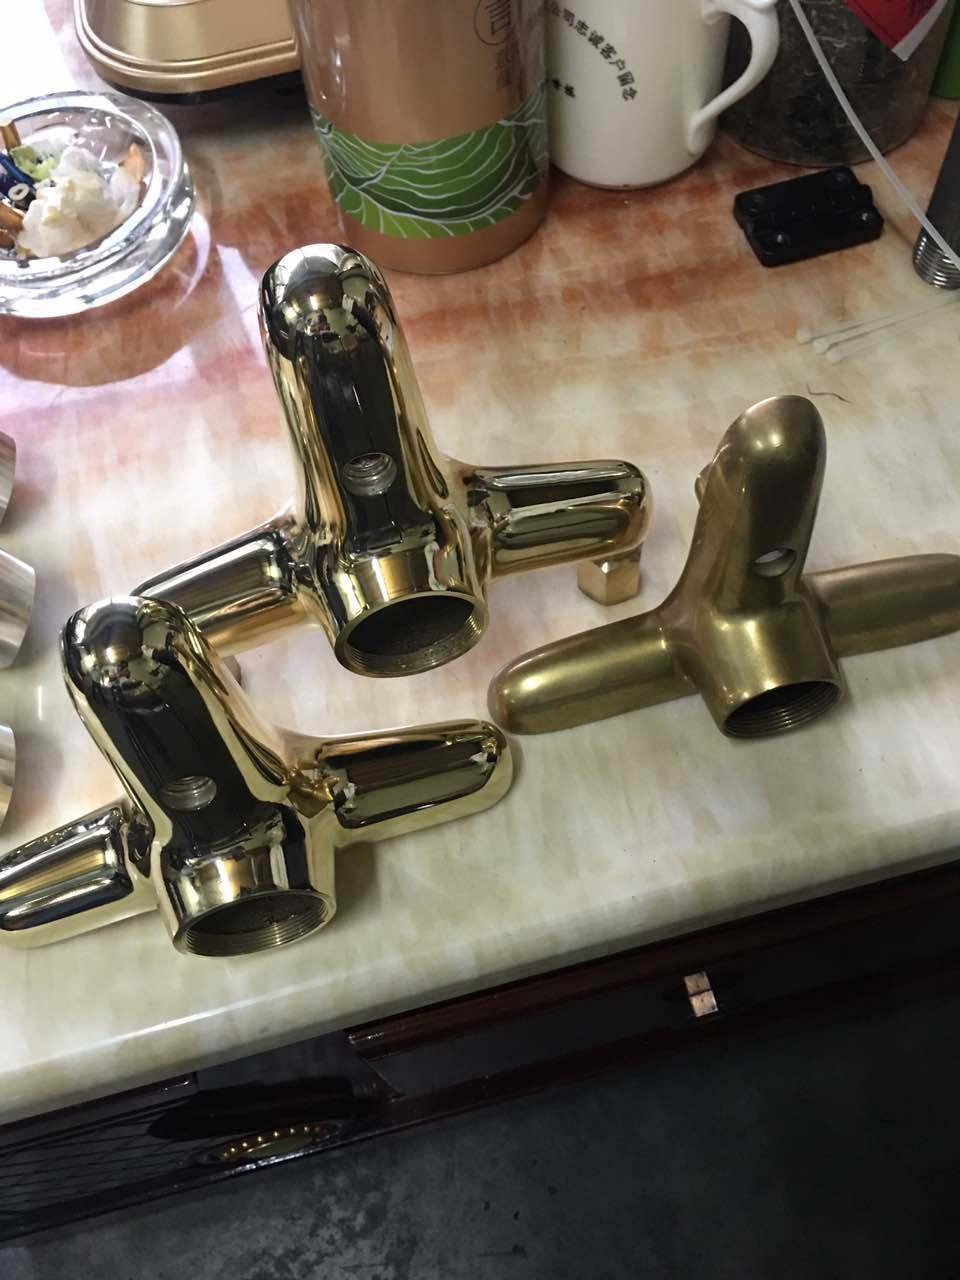 Polishing Machine for Cleaning Brass Faucet